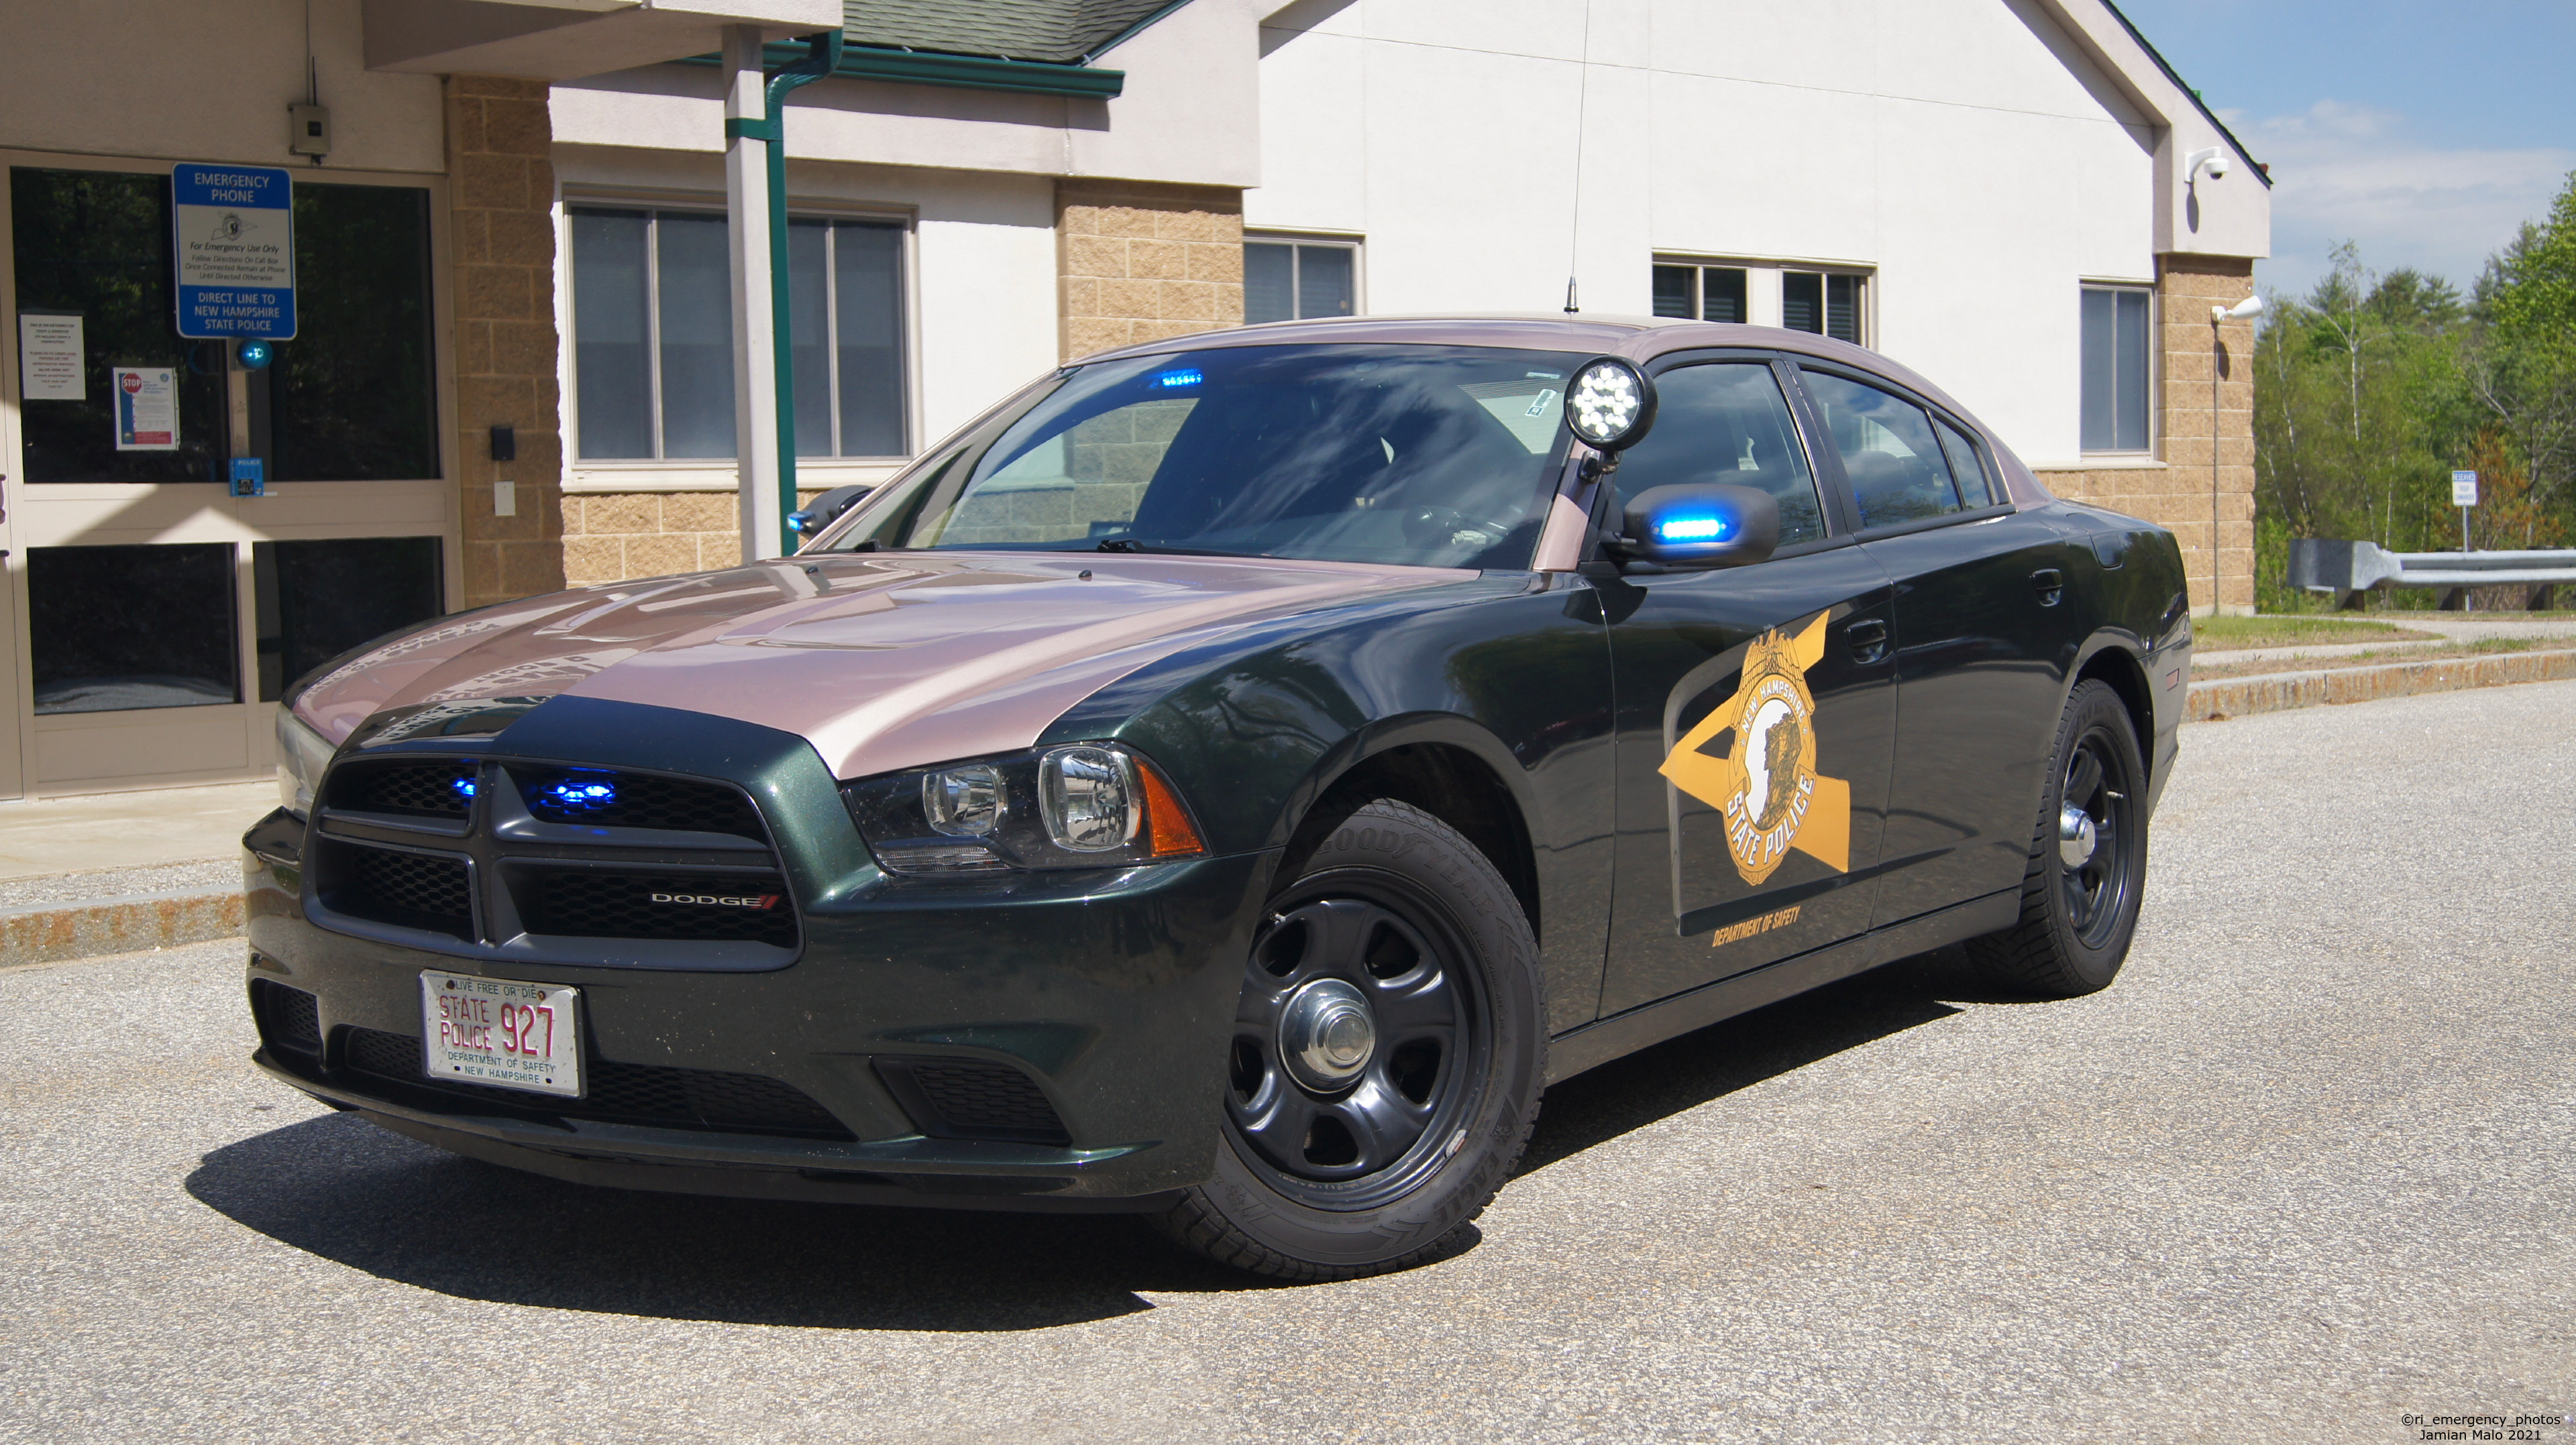 A photo  of New Hampshire State Police
            Cruiser 927, a 2011-2014 Dodge Charger             taken by Jamian Malo